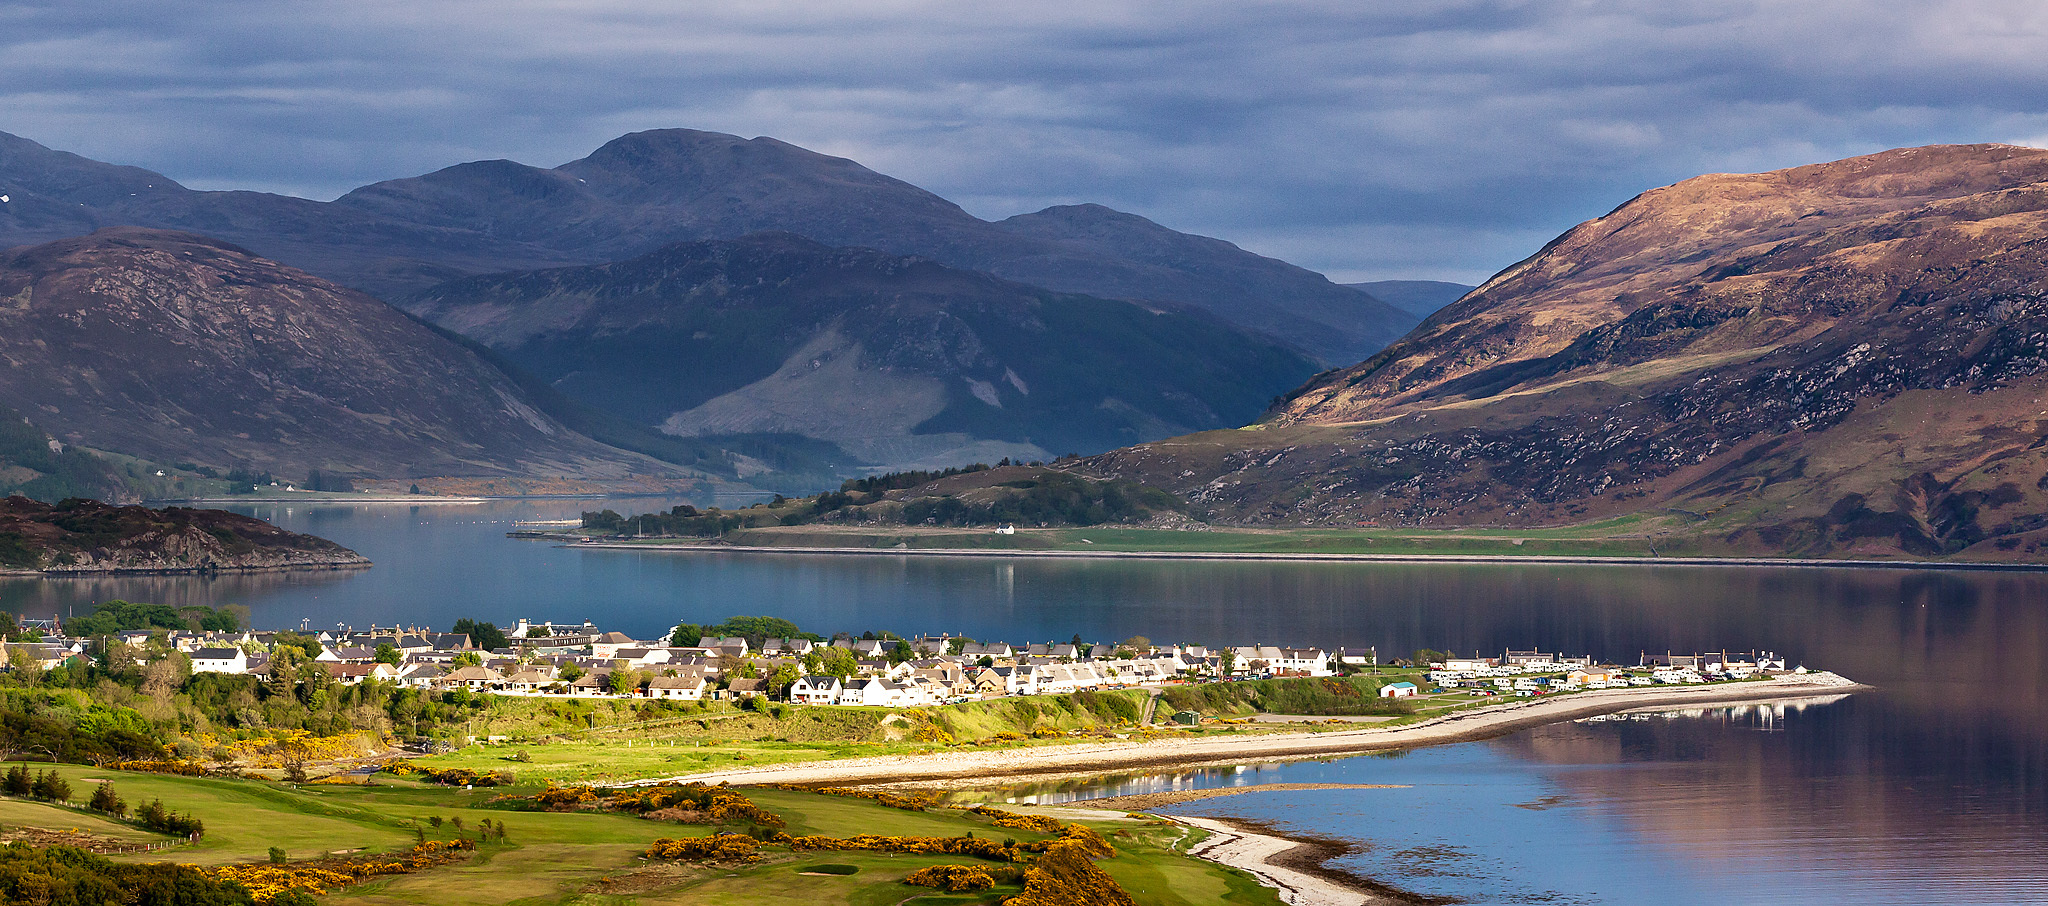 Mairi holidayed in Ullapool when she was young (Angus Bruce)